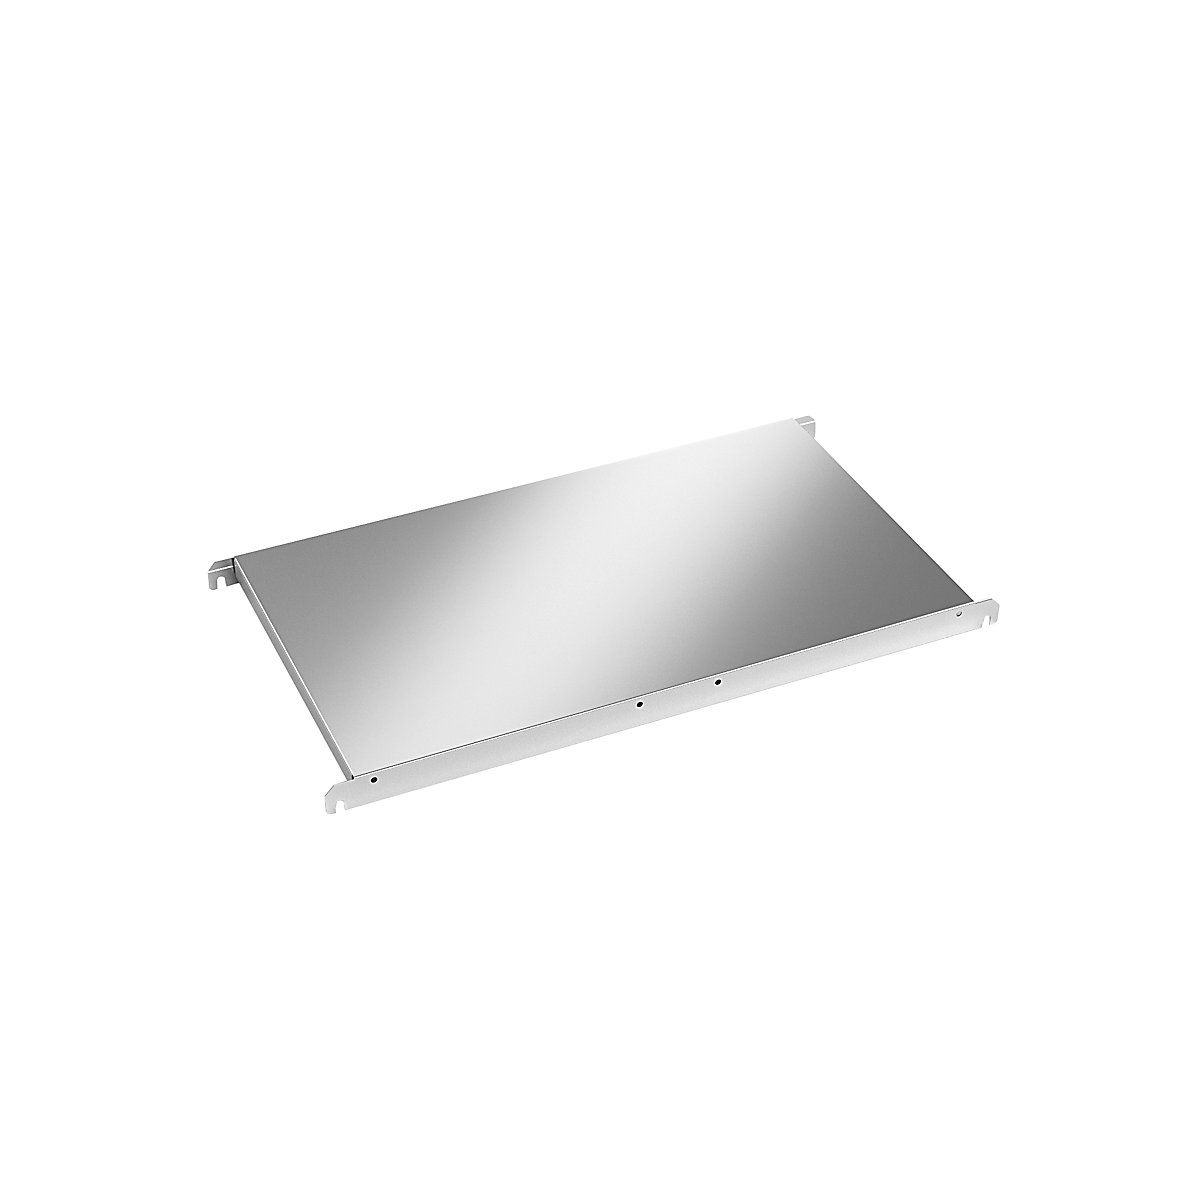 Stainless steel shelf, solid, WxD 740 x 440 mm